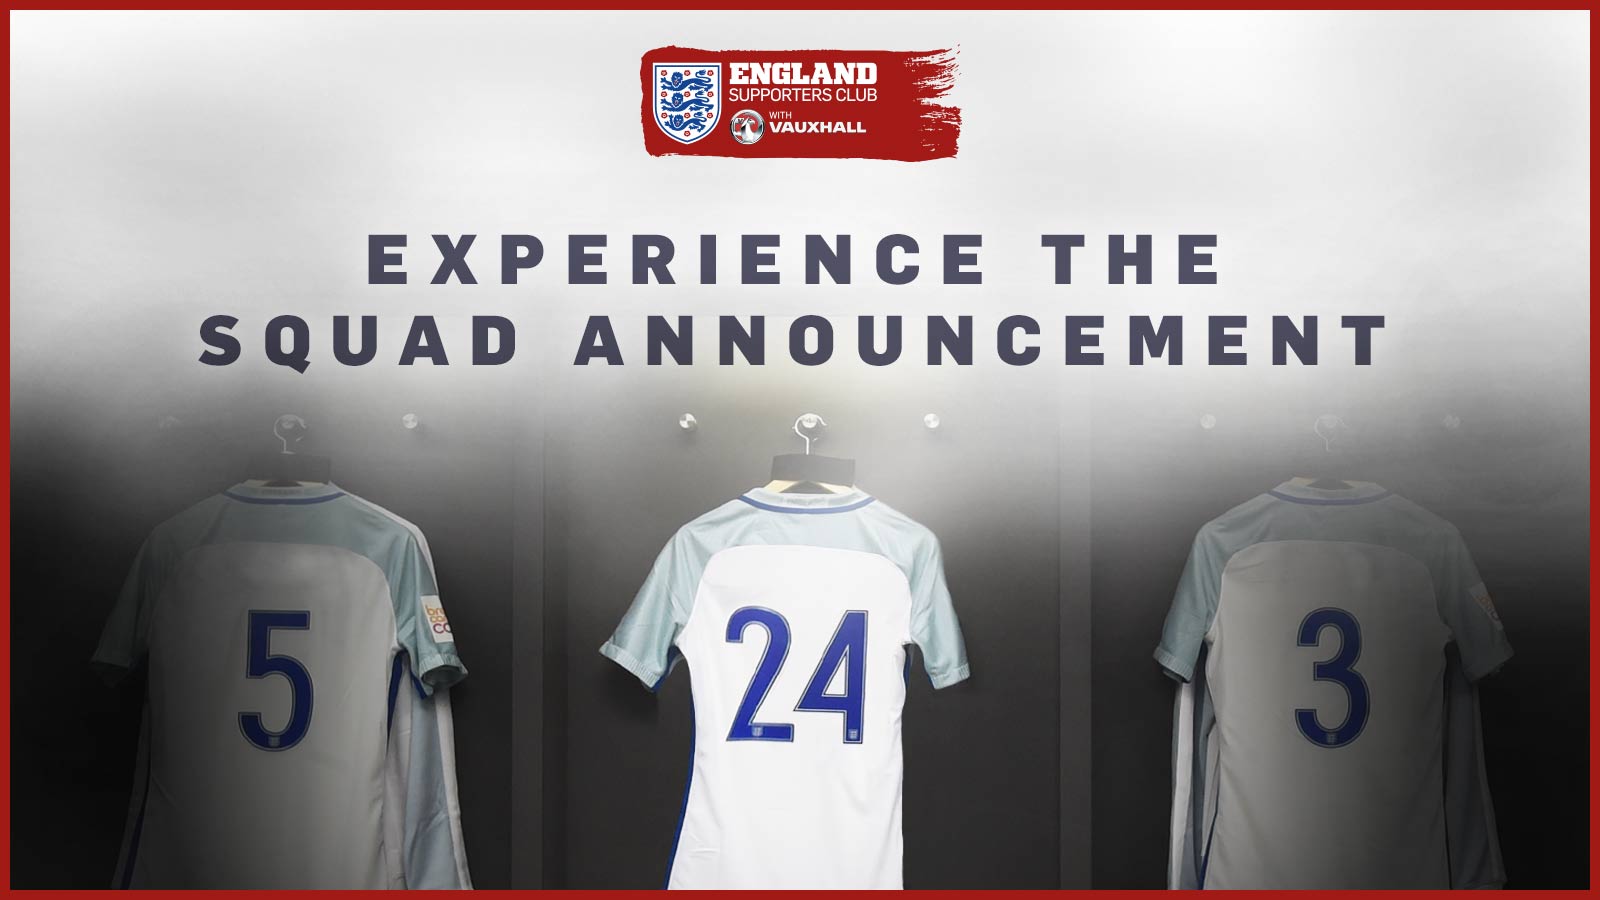 New competition: Experience the England squad announcement